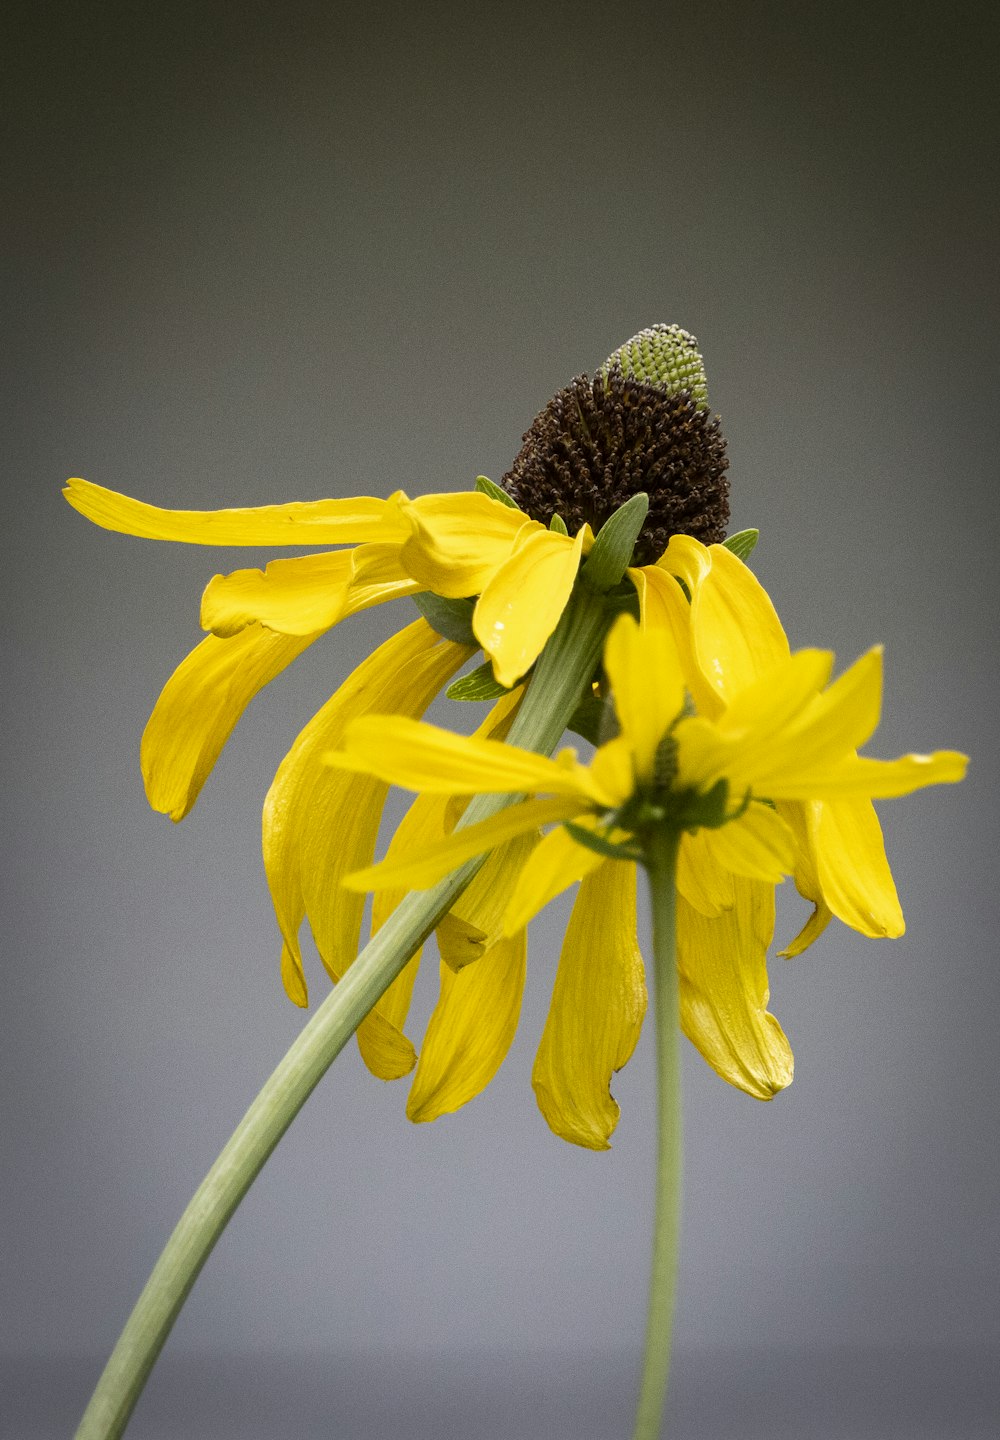 a close up of a yellow flower with a gray background